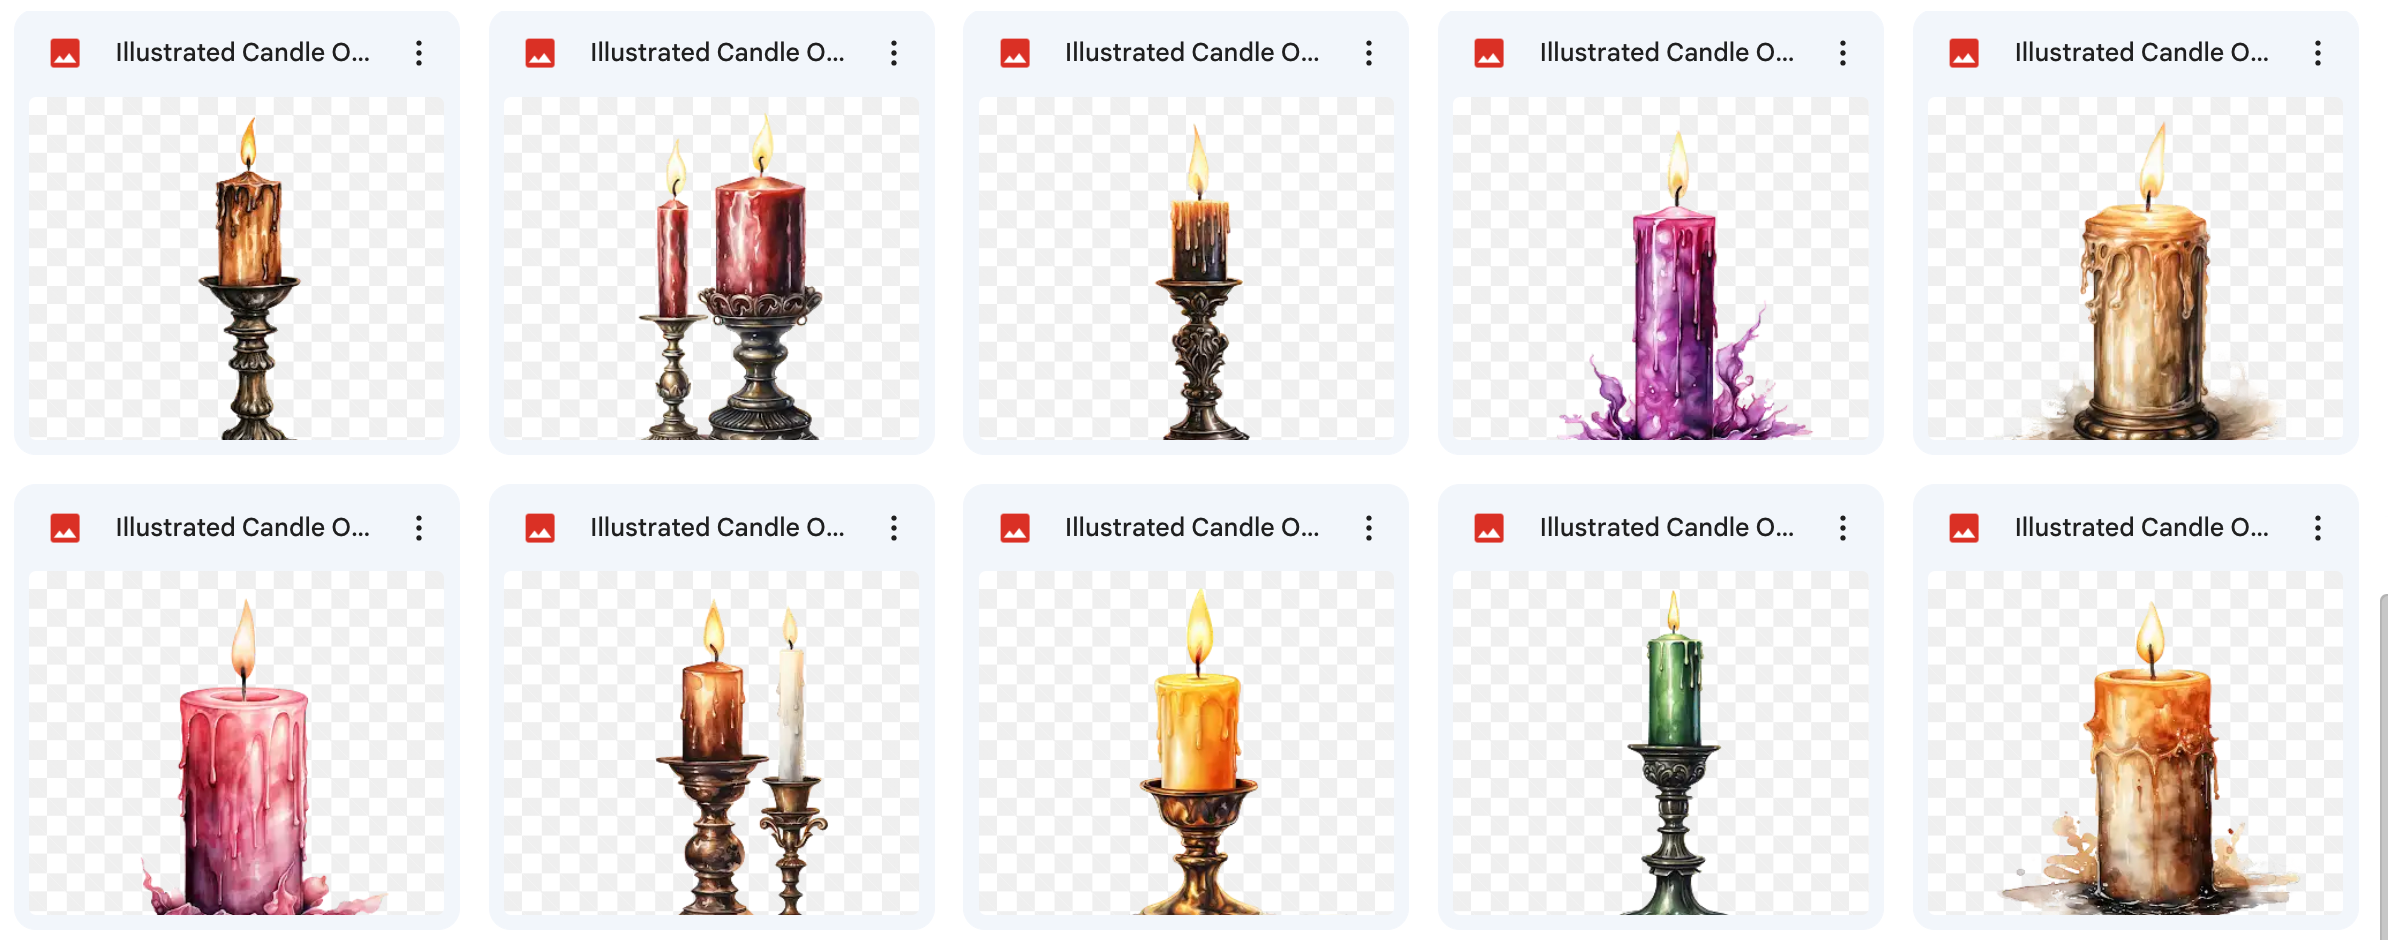 Illustrated Candlelight Asset Pack - Meg Bitton Productions